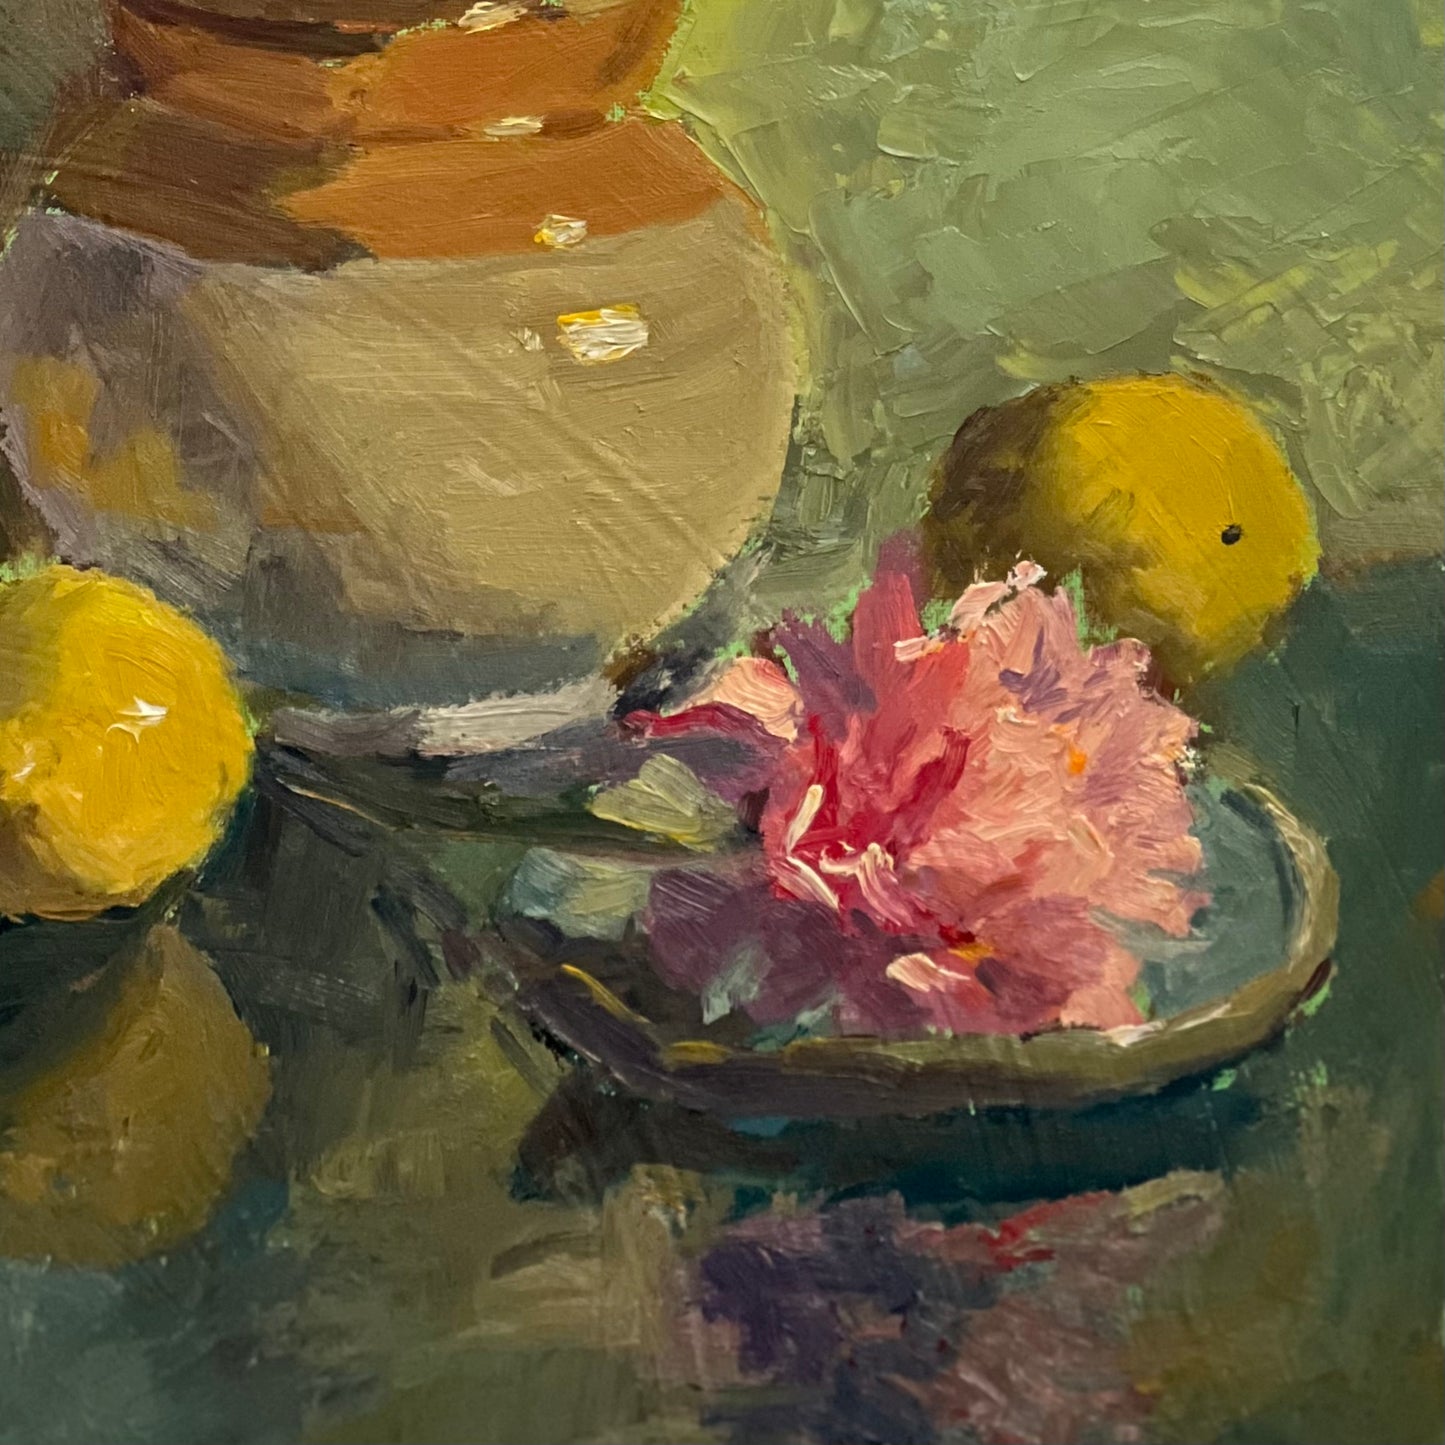 Pink and yellow with reflections - still life oil painting